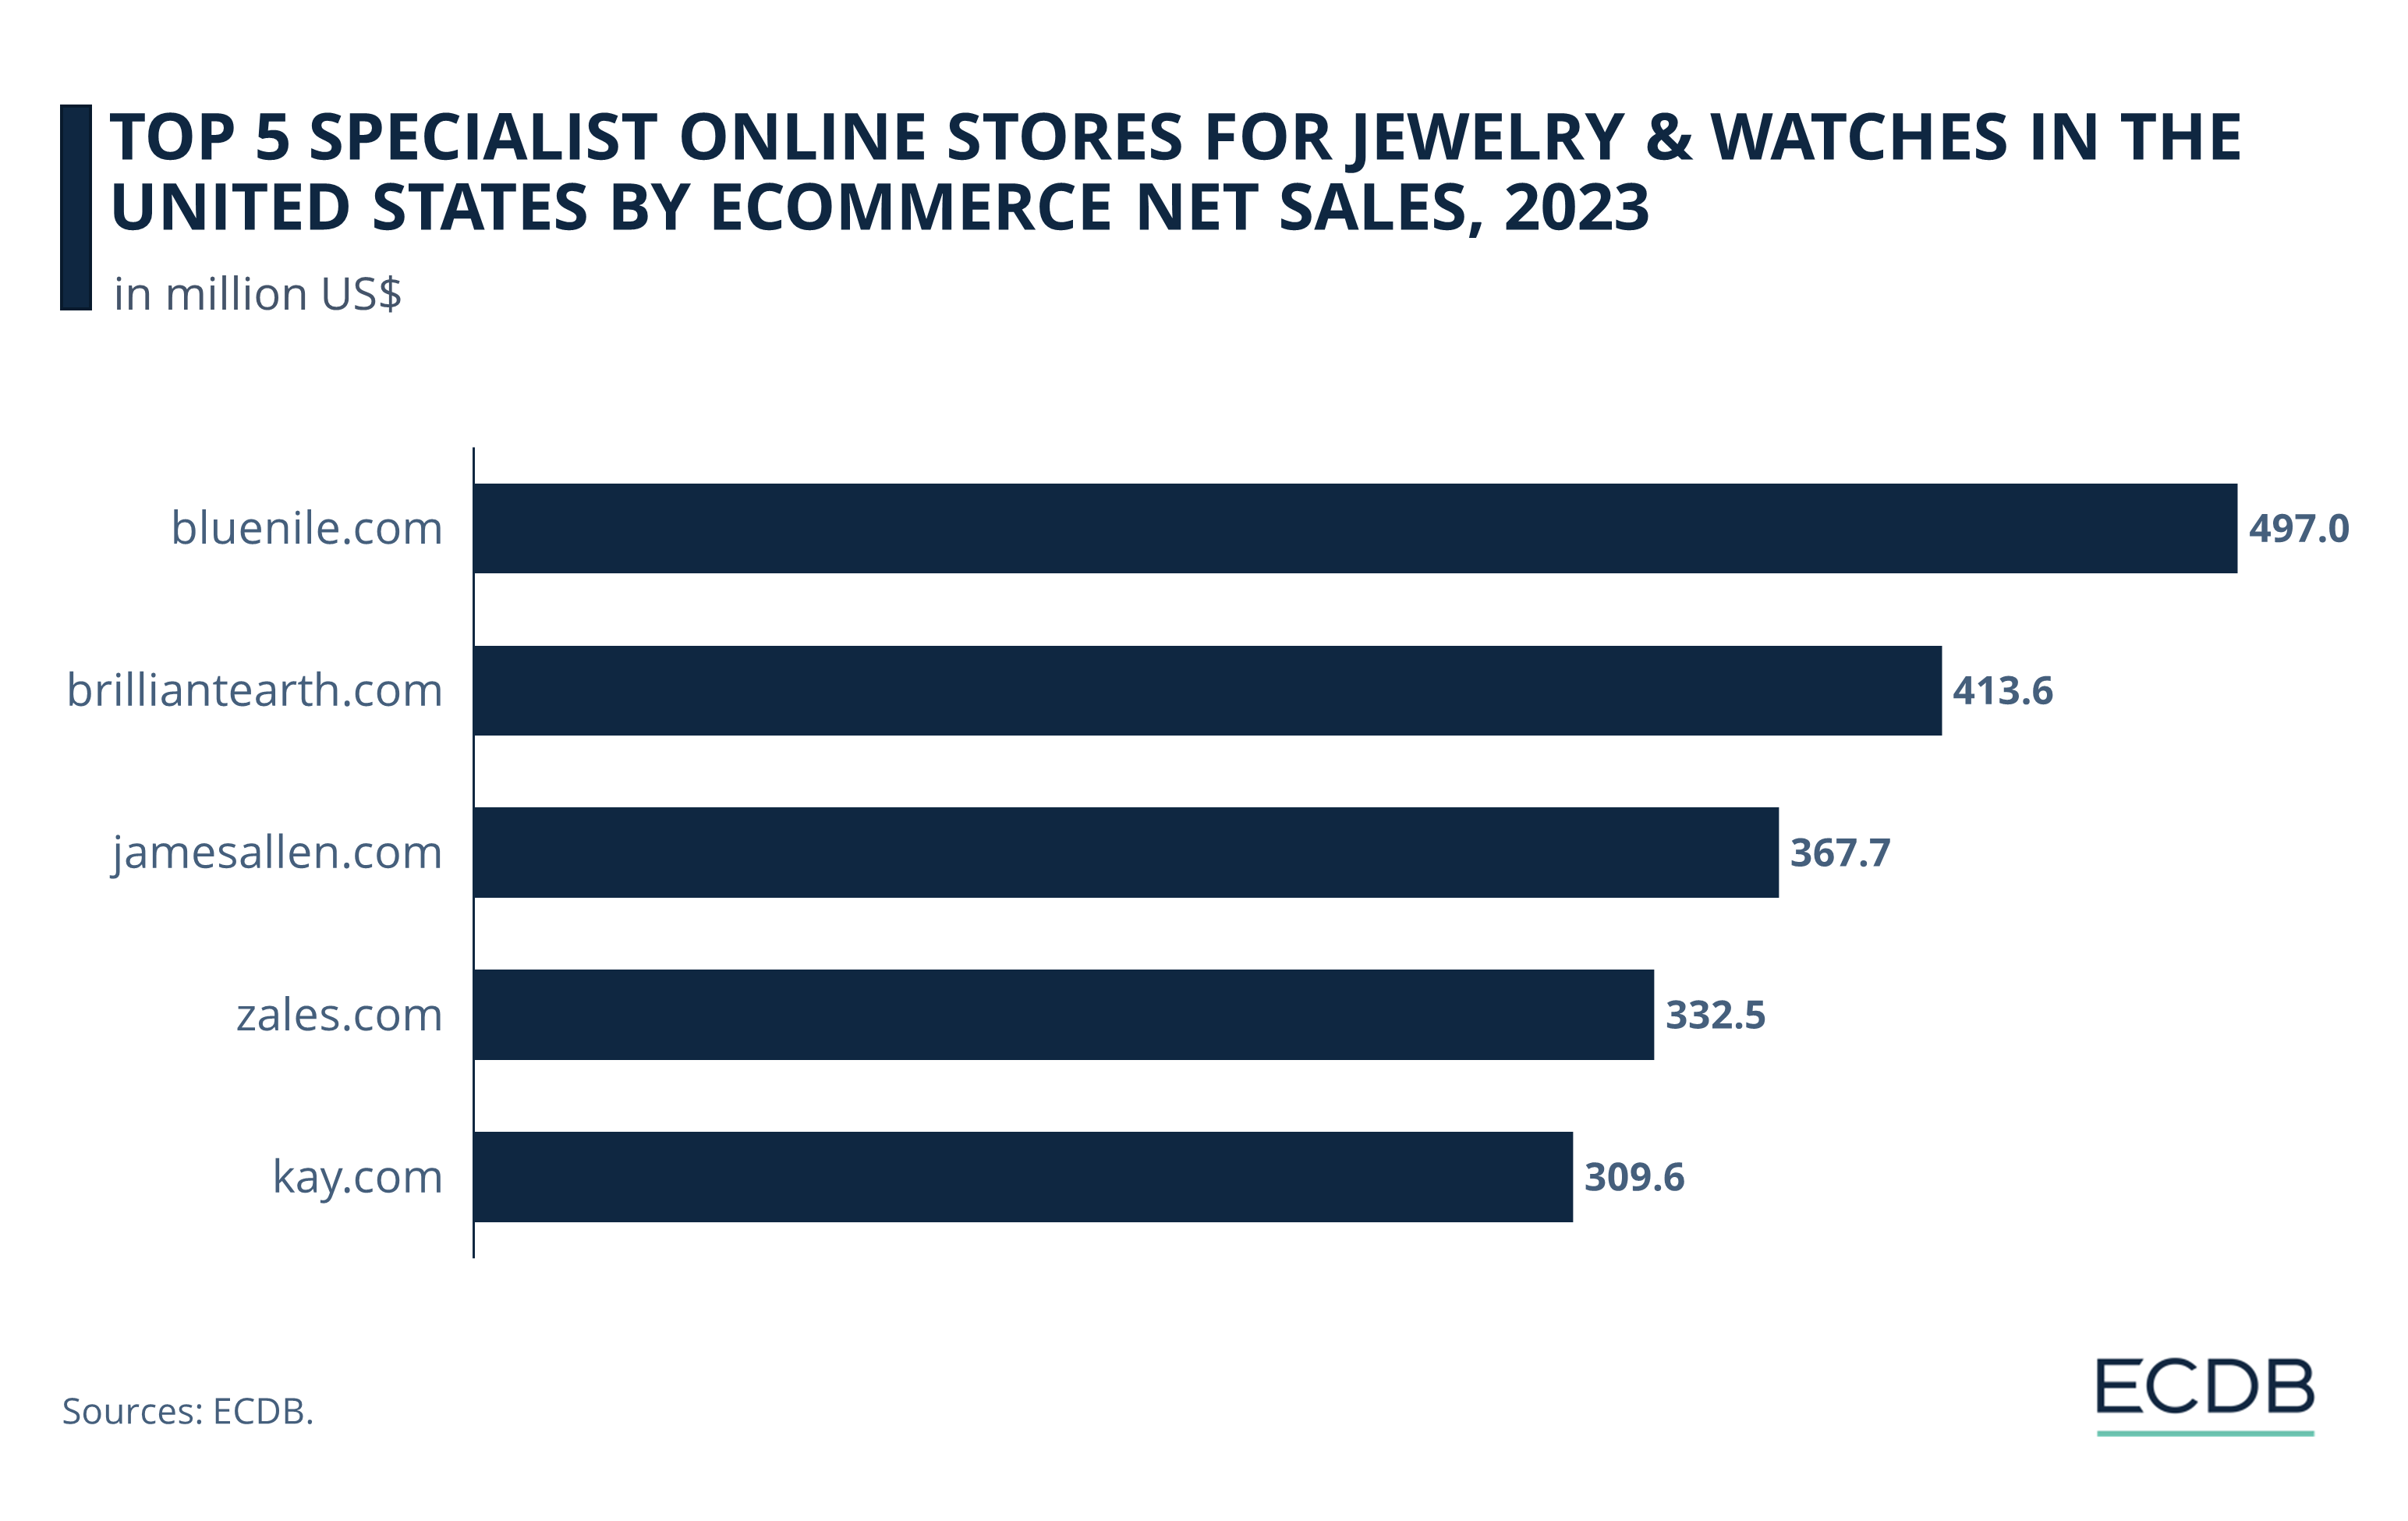 Top 5 Specialist Online Stores for Jewelry & Watches in the United States by eCommerce Net Sales, 2023